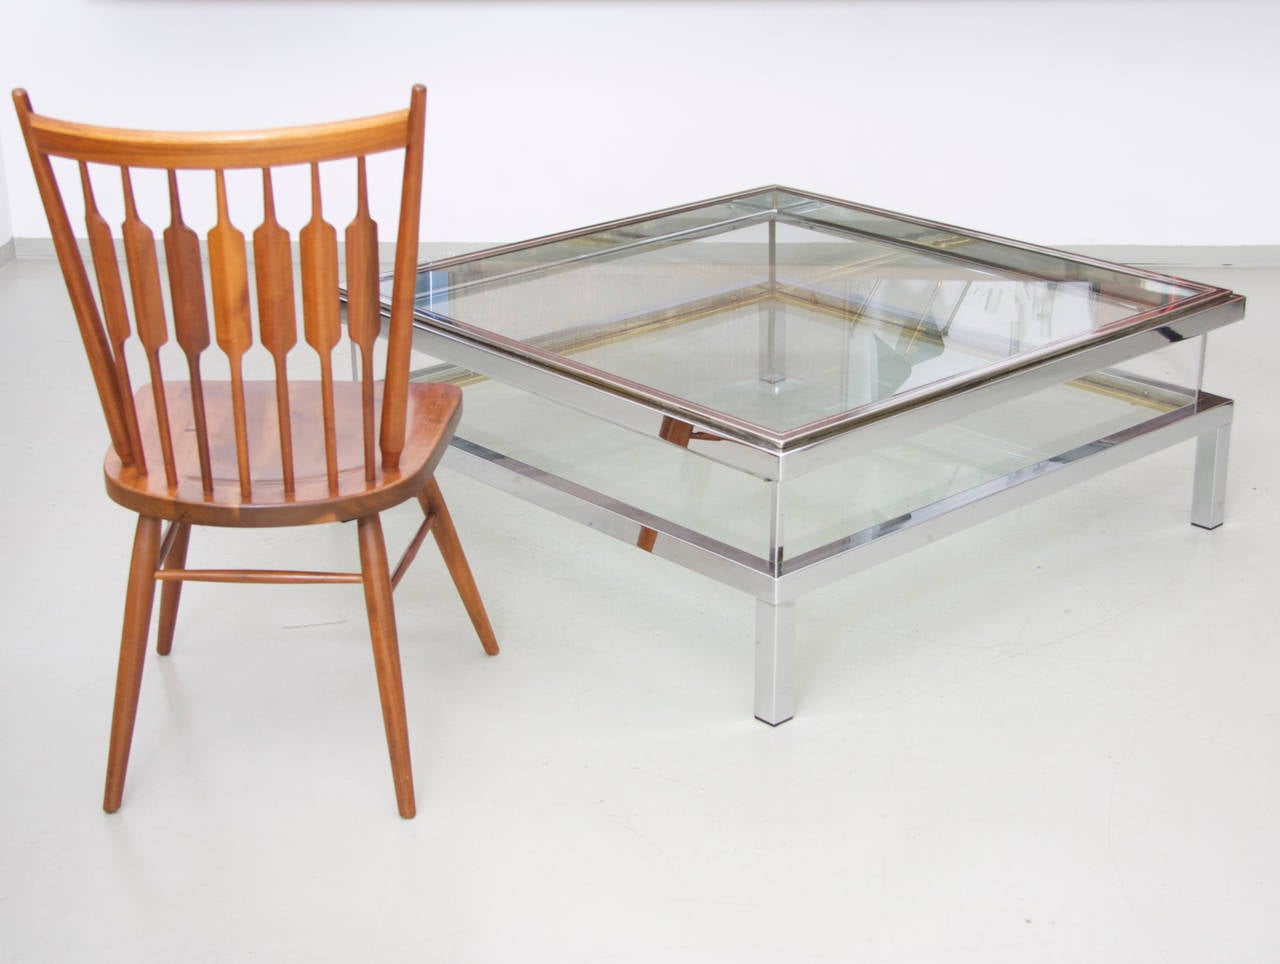 Large square glass table with sliding top by Maison Jansen. Frame has an original chrome-plated metal finish with beautiful aging.

